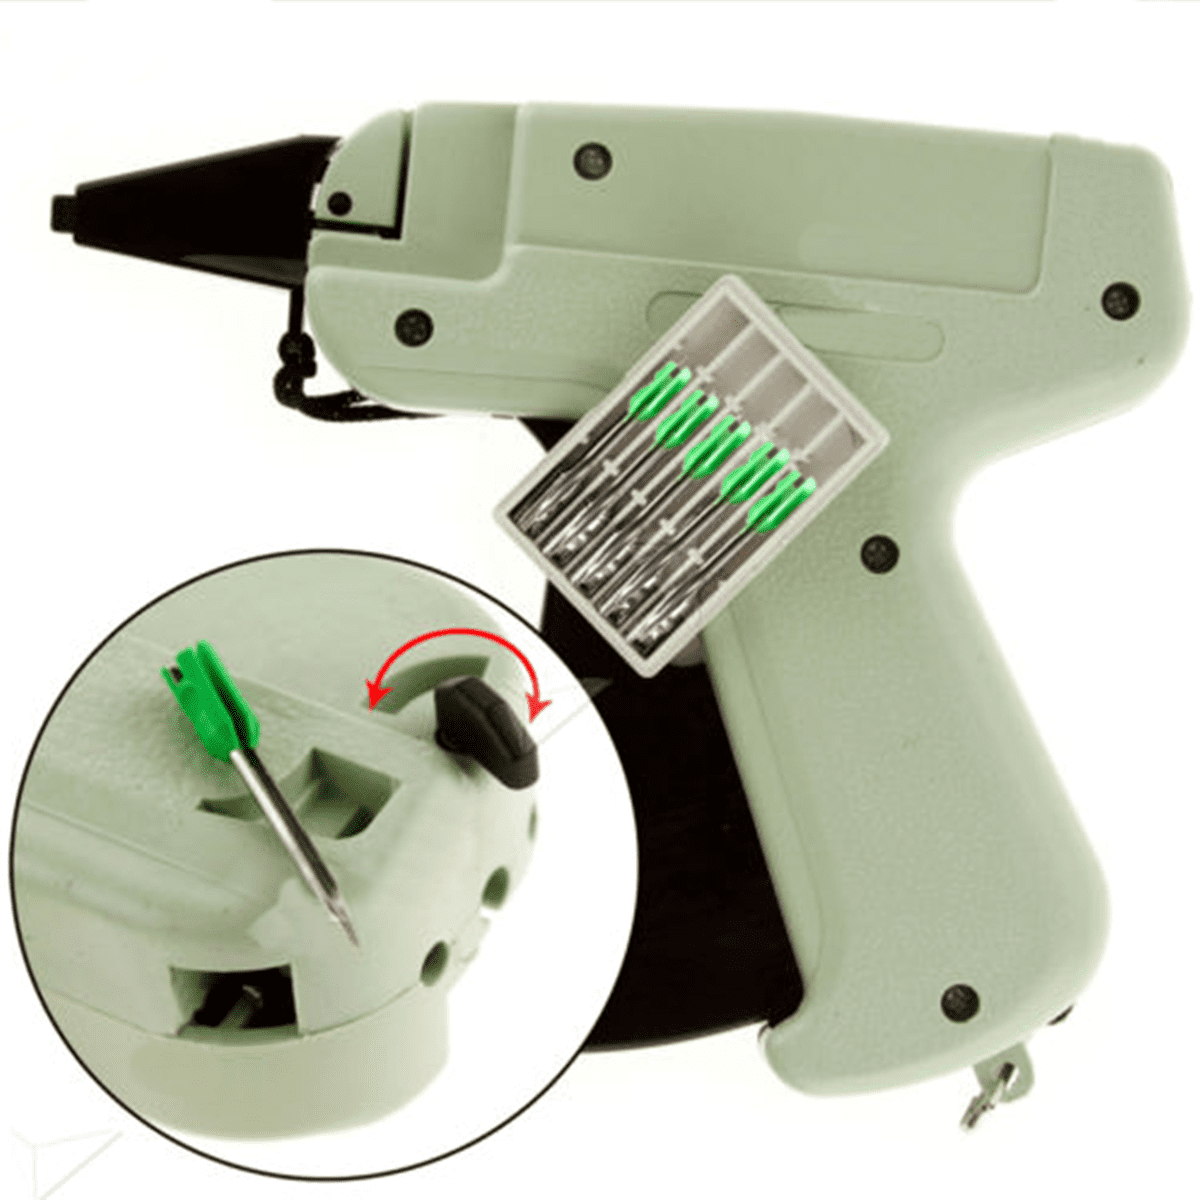 5Pcs Standard Price Tag Gun Needles For Any Standard Label Price Tag AttacFBBP 